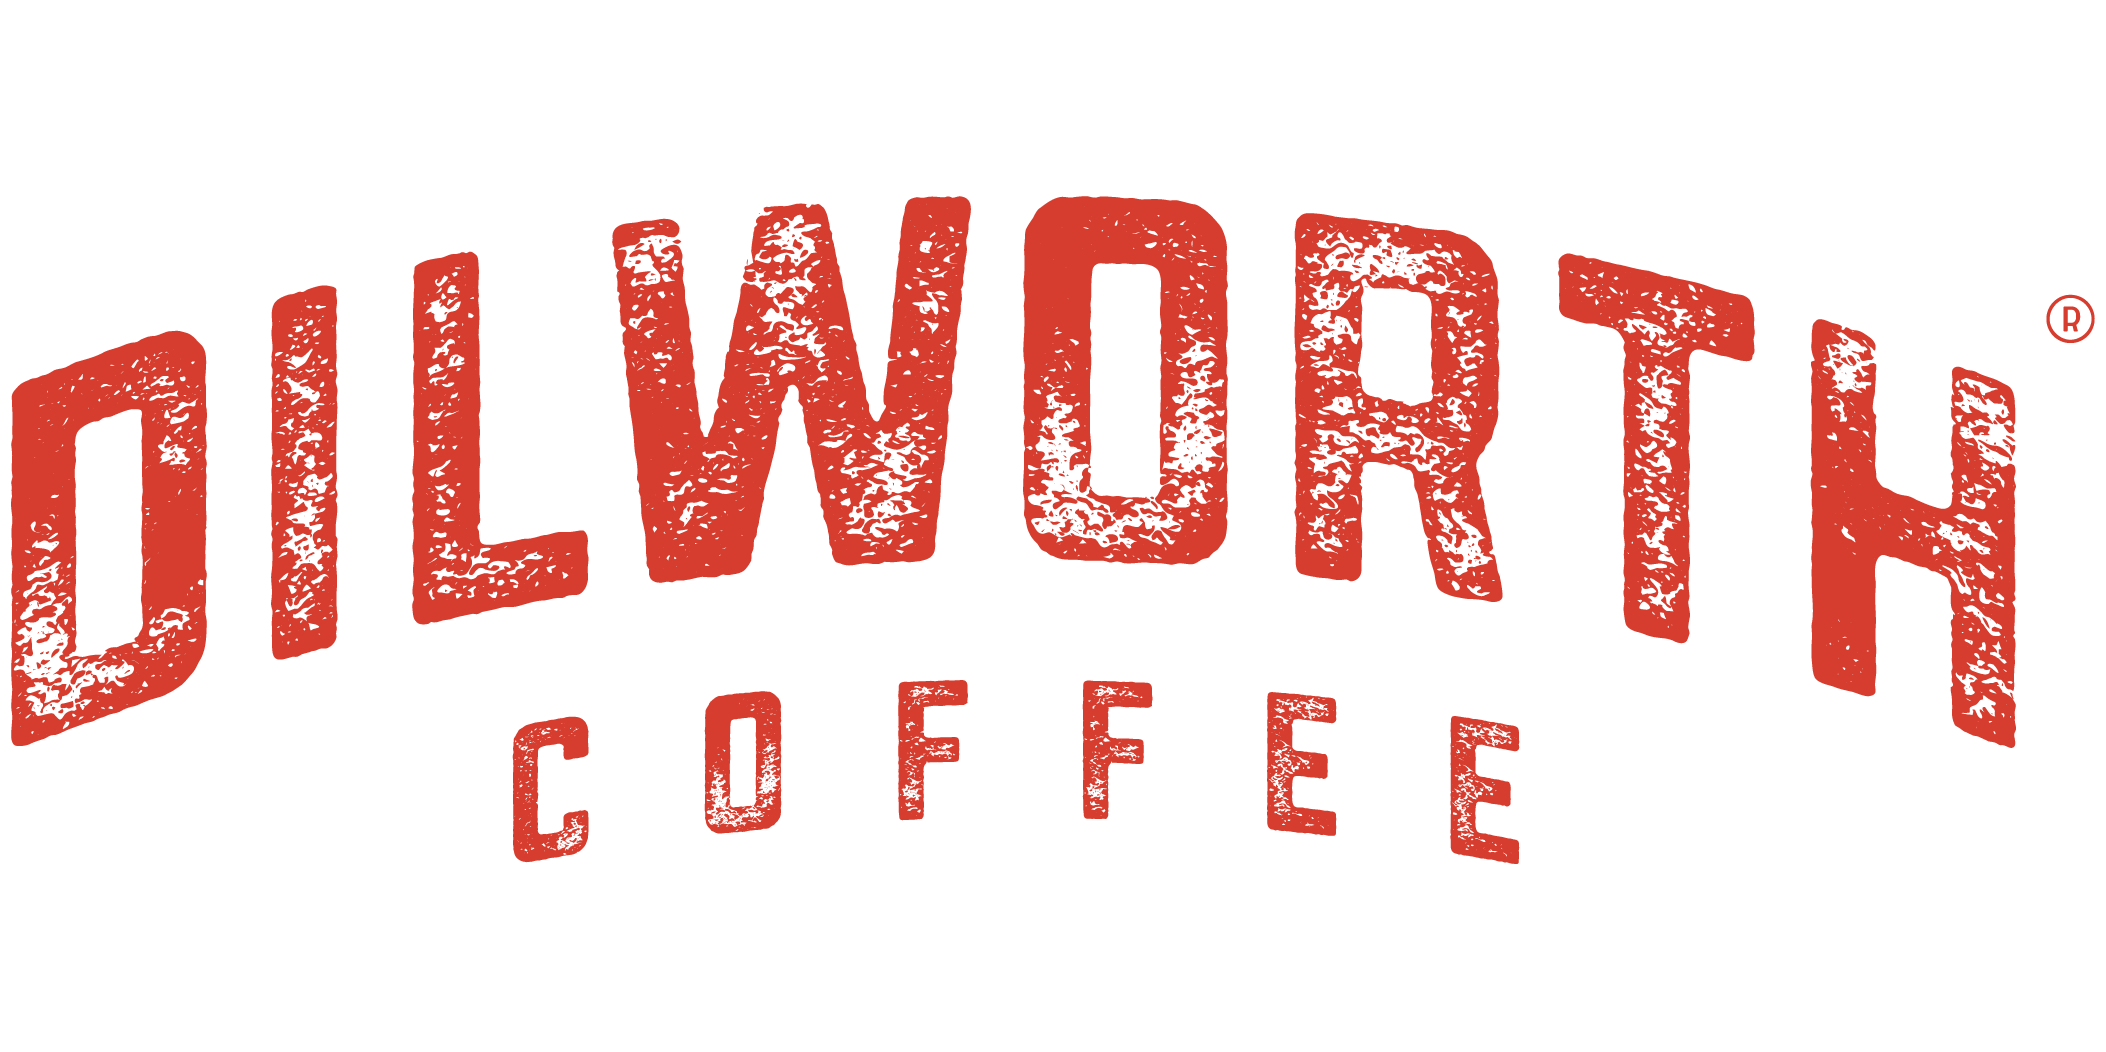 Dilworth Coffee Sponsor, Showcasing Their Logo in this Image